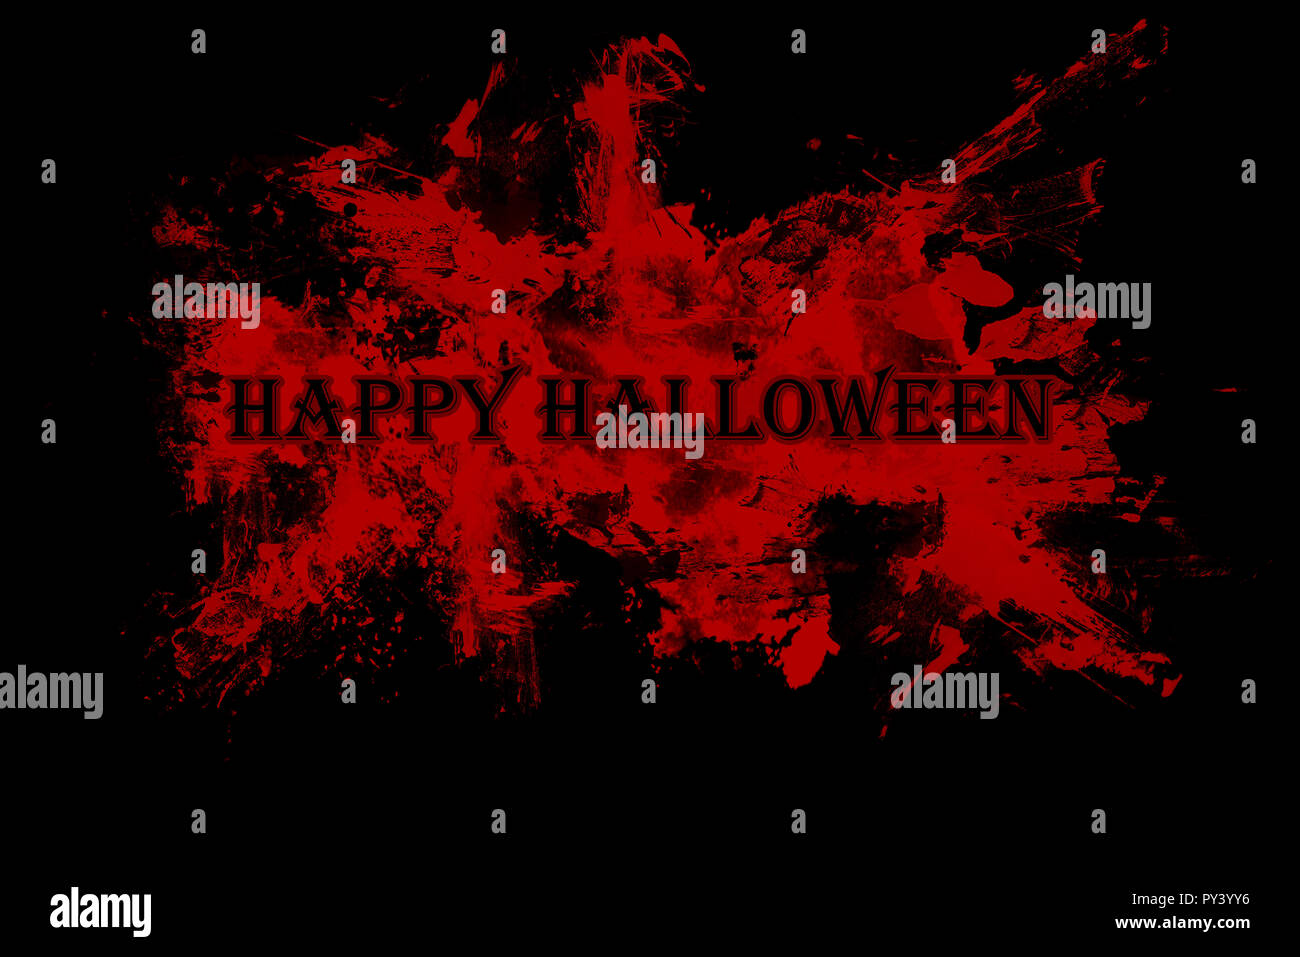 Happy Halloween text on red and black background Stock Photo - Alamy